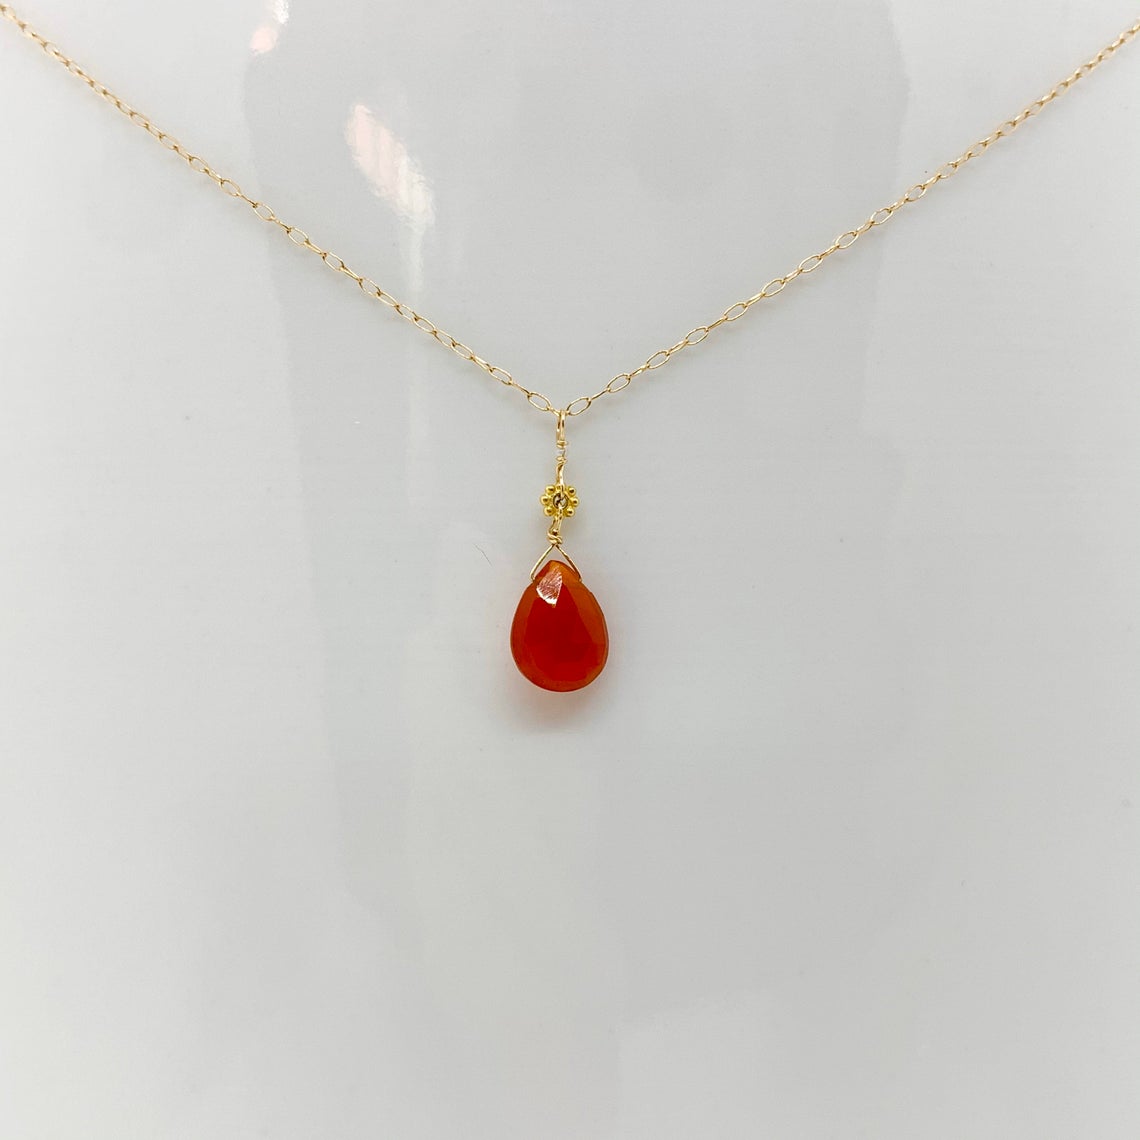 14k Gold Chain Necklace w/ Mexican Fire Opal, 18k Gold Daisy & Antique Italian Bead